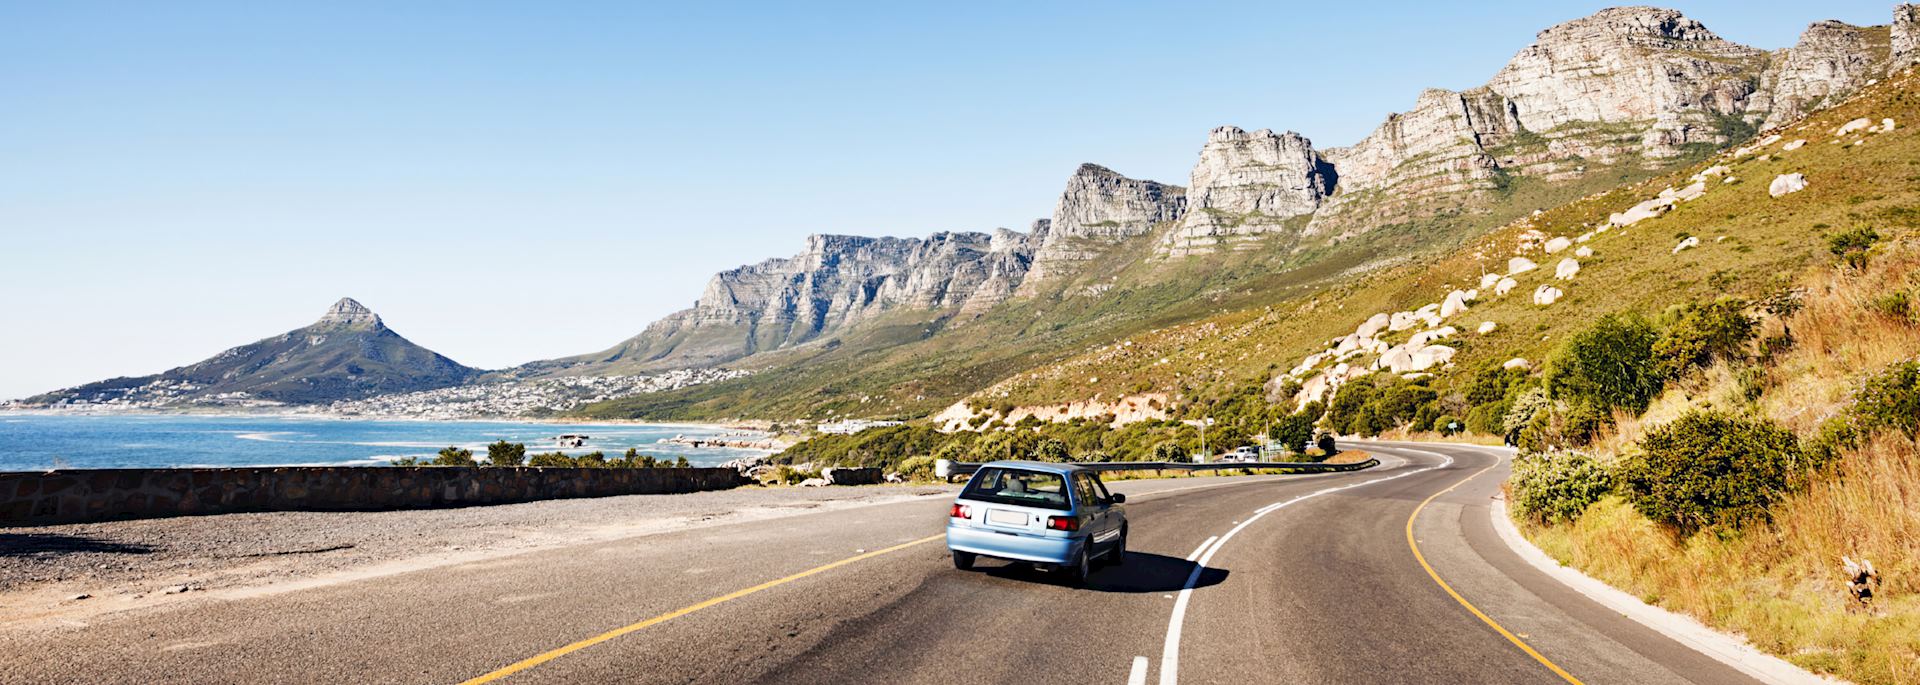 Road to Cape Town, South Africa